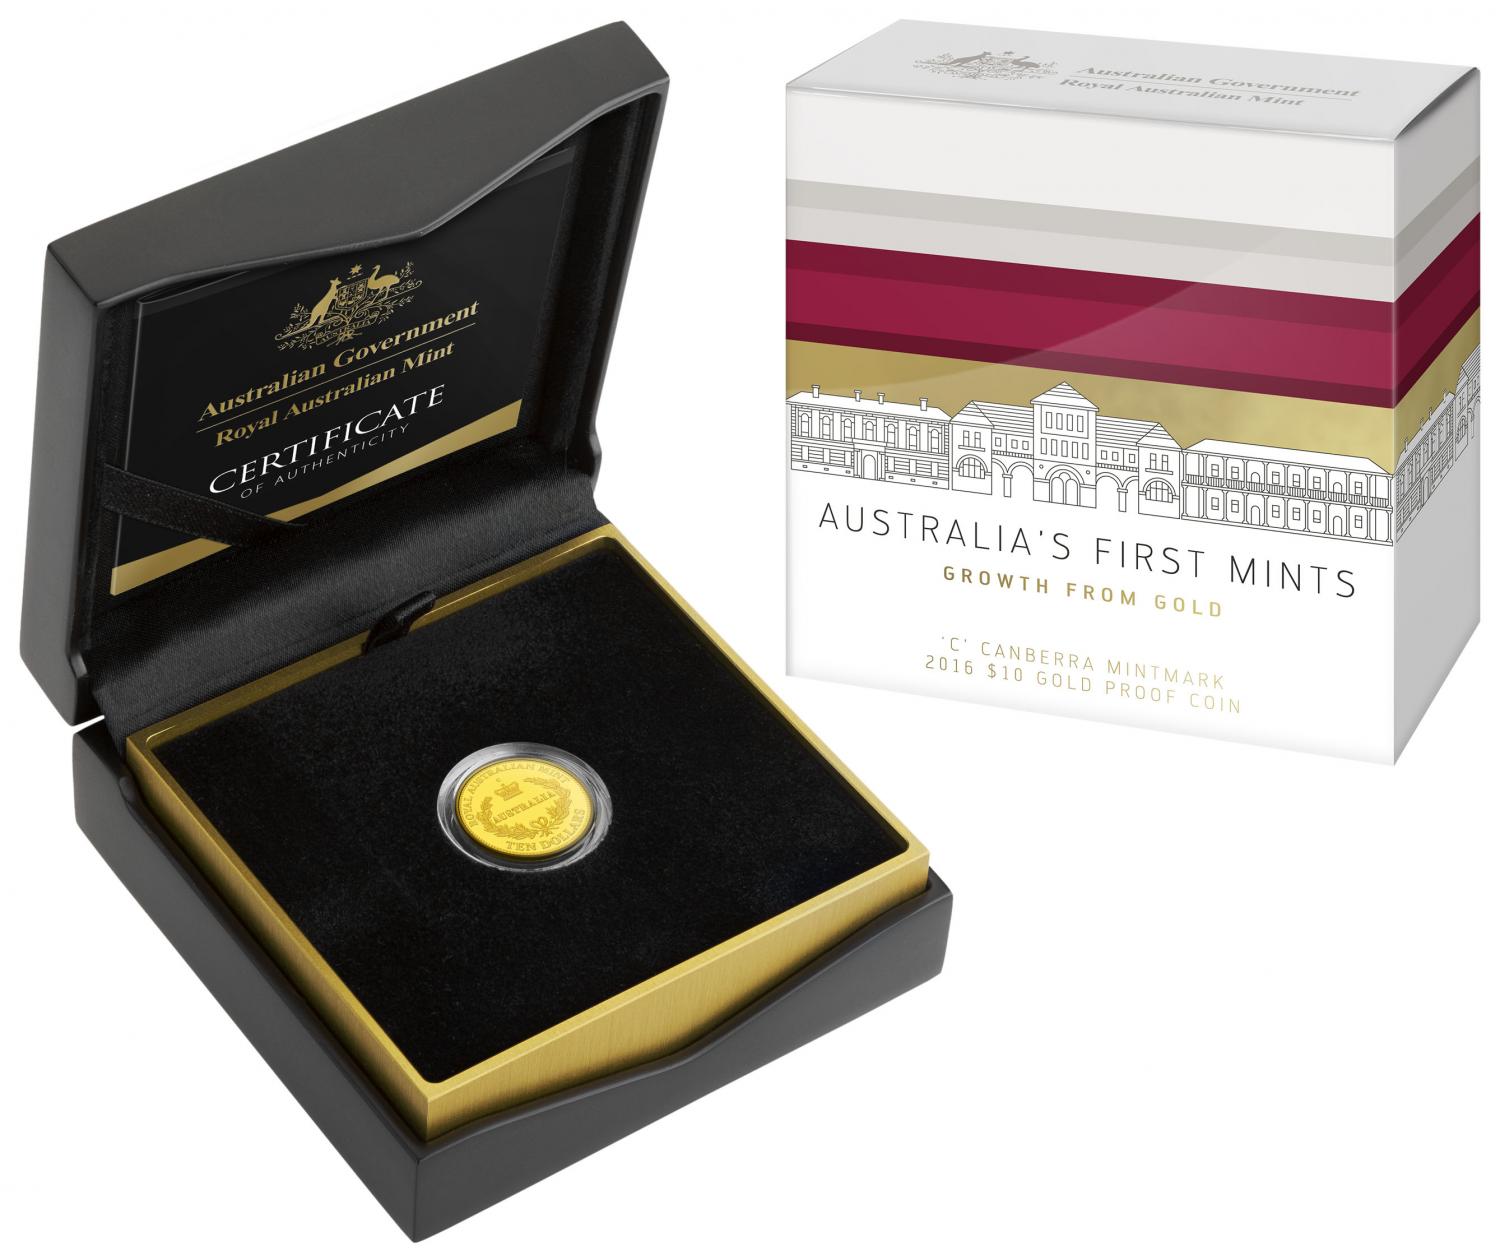 Thumbnail for 2016 Australia's First Mints $10.00 Gold Proof Coin